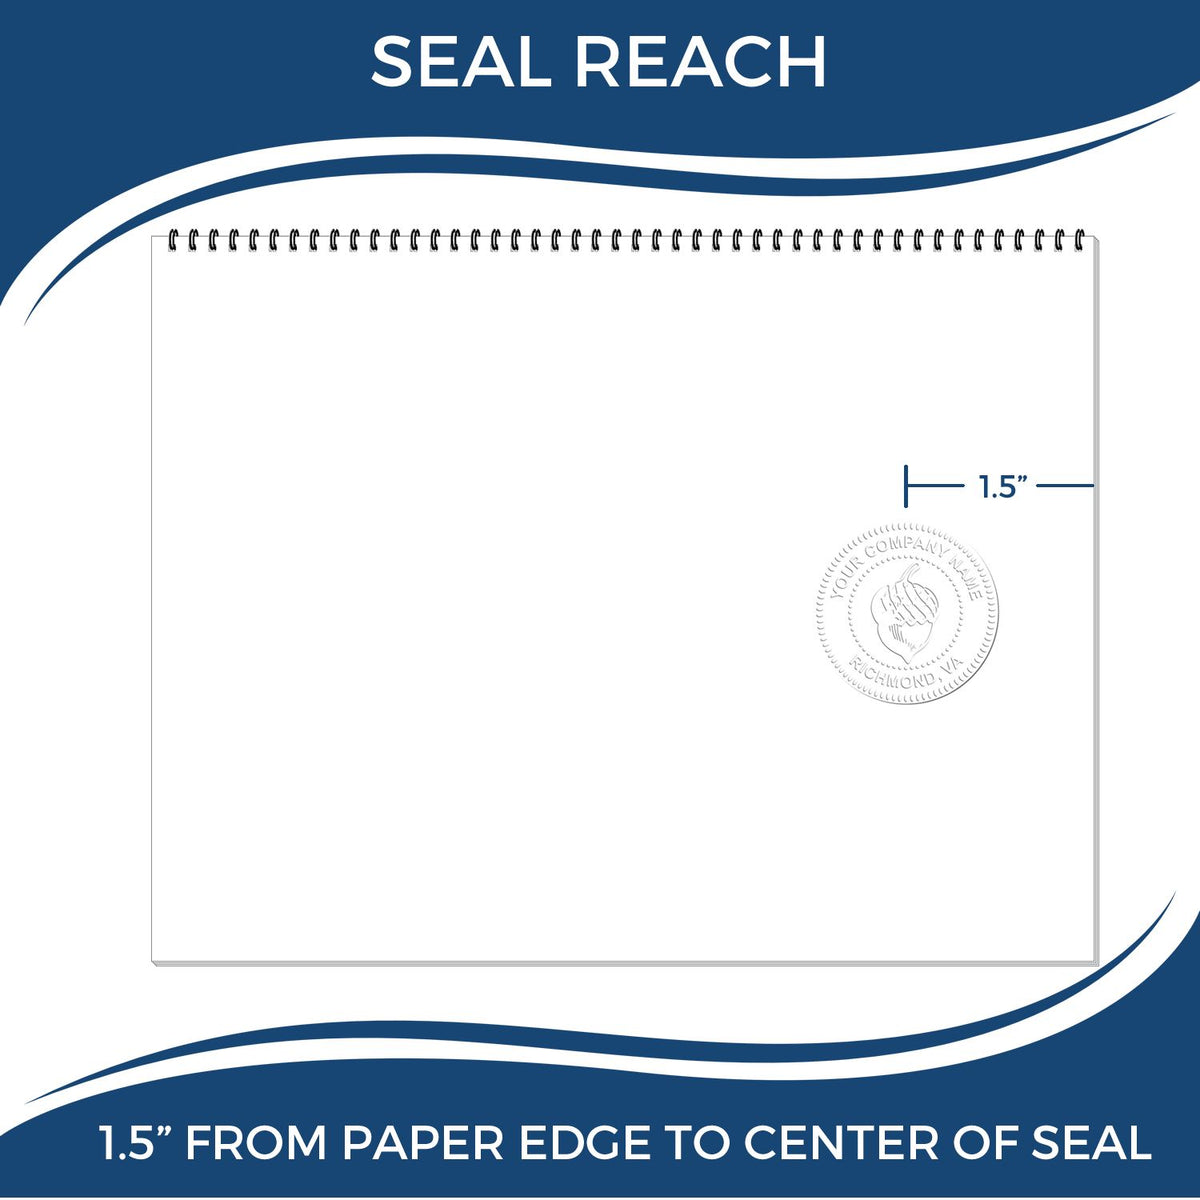 An infographic showing the seal reach which is represented by a ruler and a miniature seal image of the State of Texas Soft Land Surveyor Embossing Seal